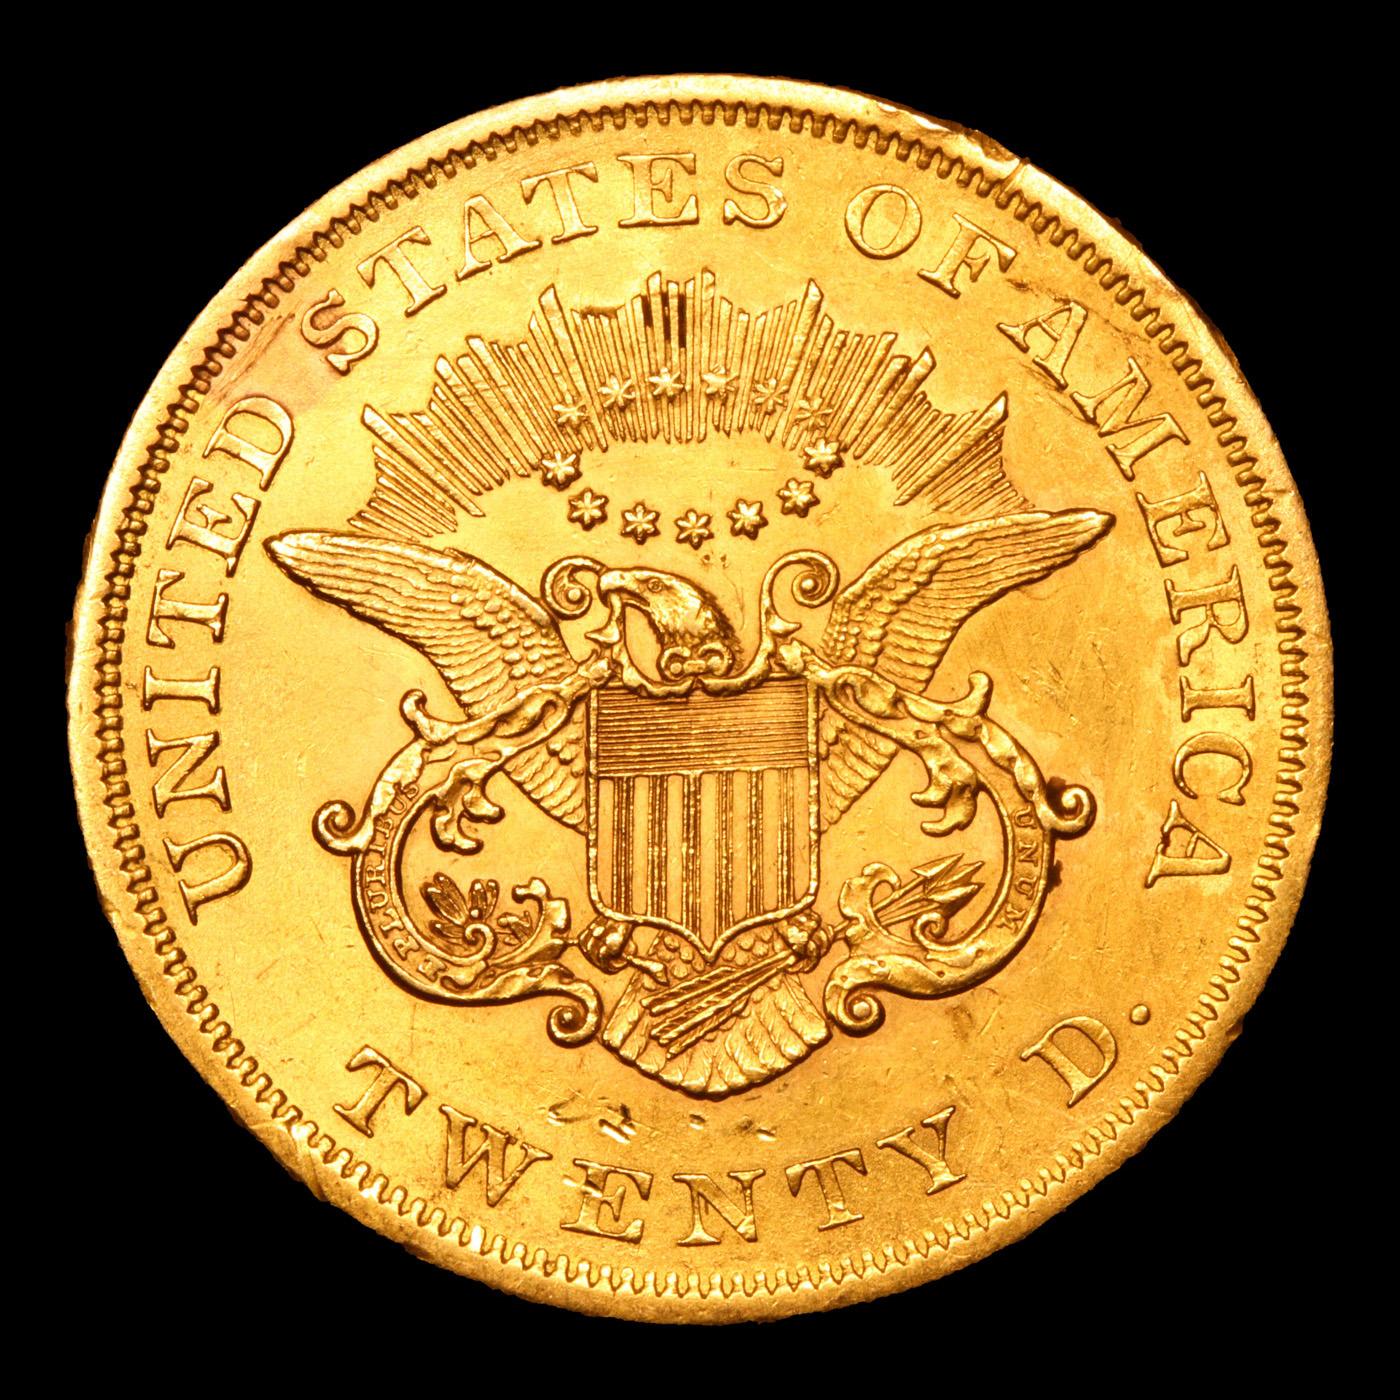 ***Auction Highlight*** 1863-p Gold Liberty Double Eagle $20 Graded ms63 details By SEGS (fc)